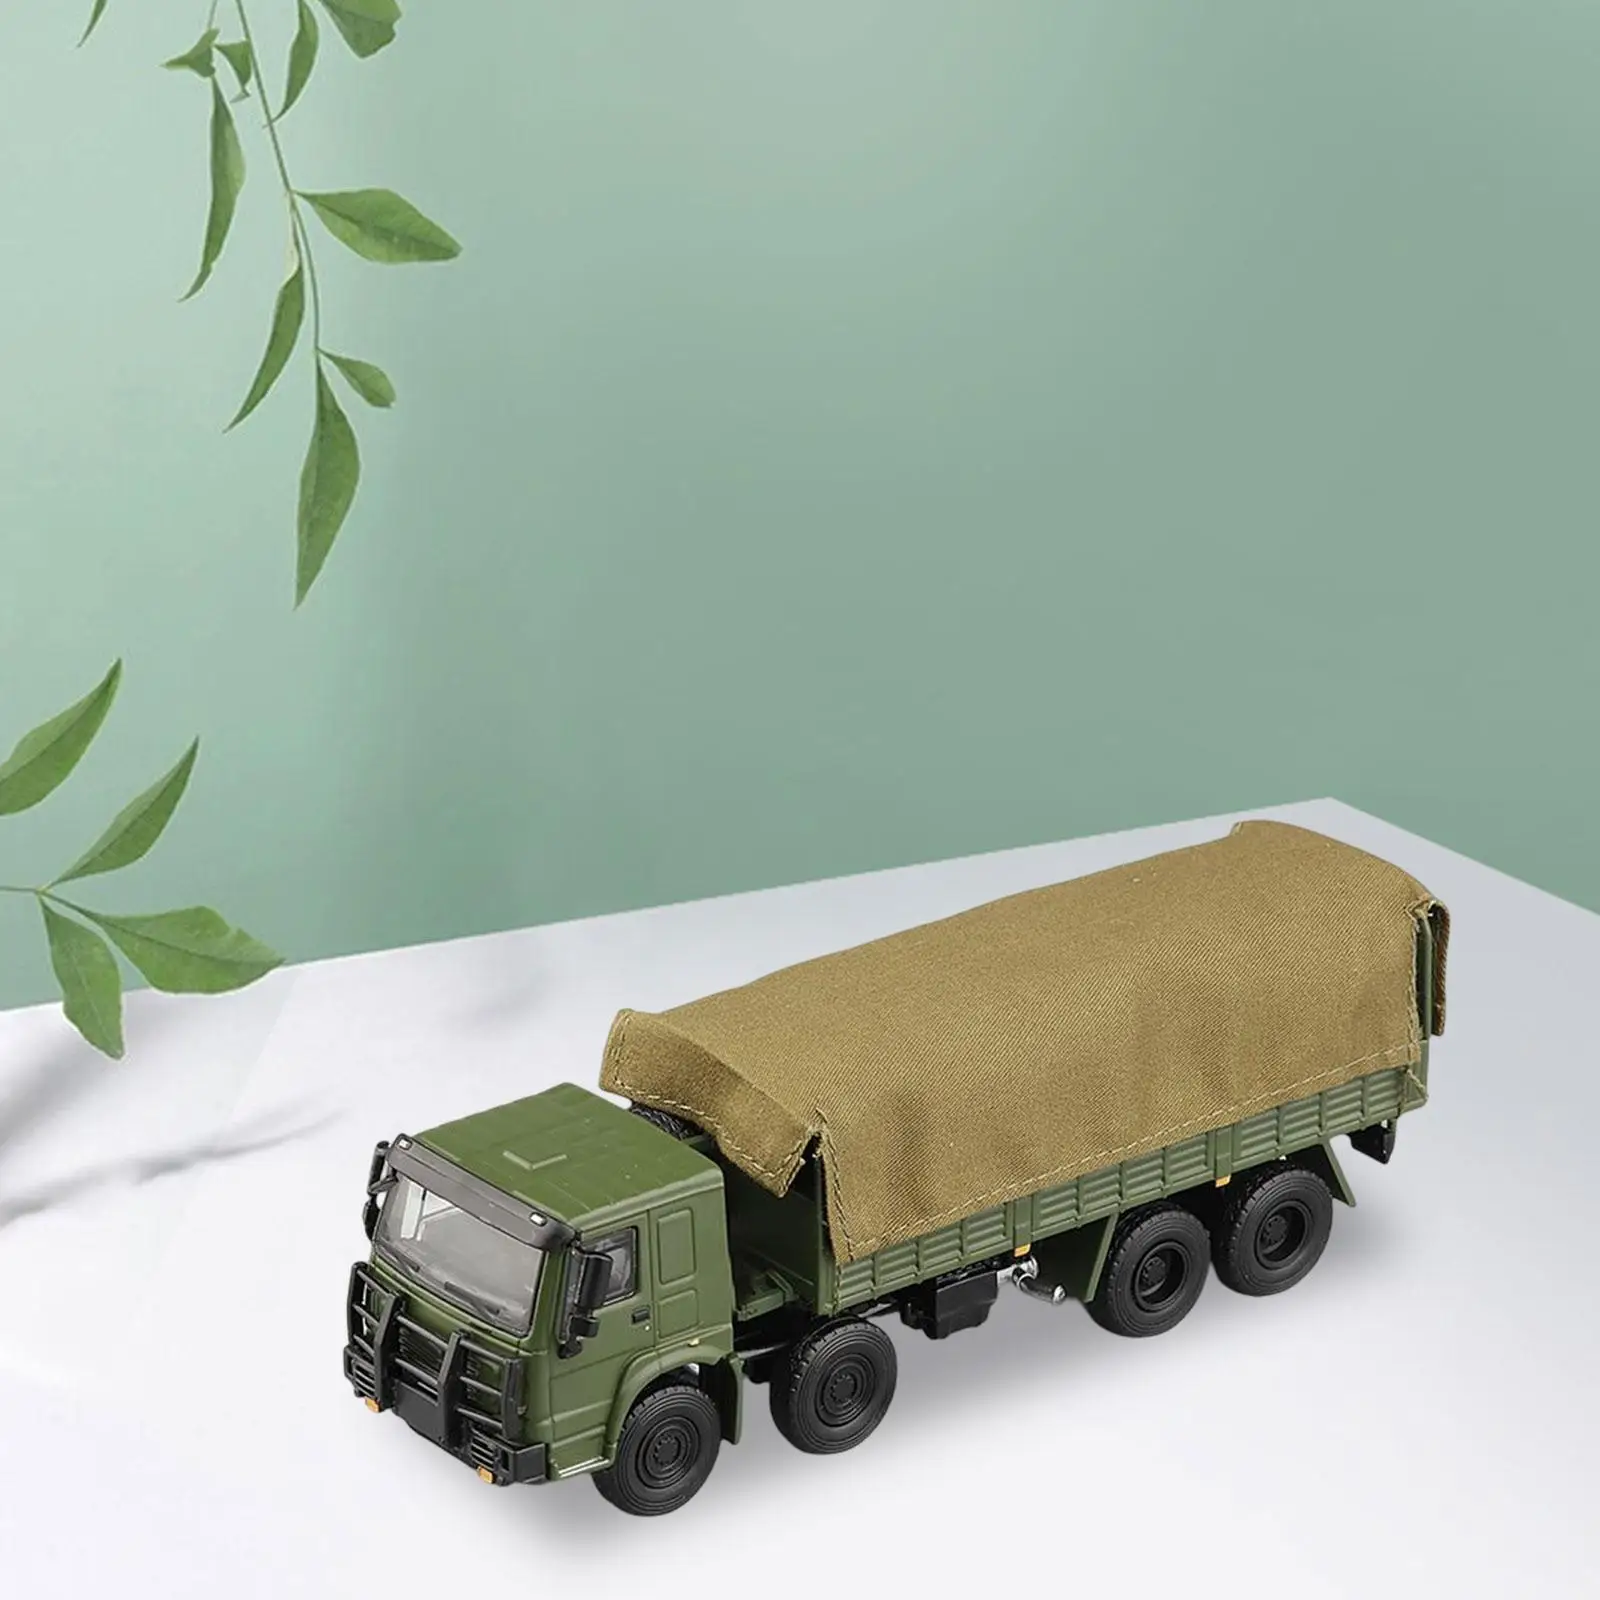 1/64 Transport Truck Sand Table Ornament Diecast Toys Alloy Car Model for Photography Props Scenery Landscape Diorama Decoration